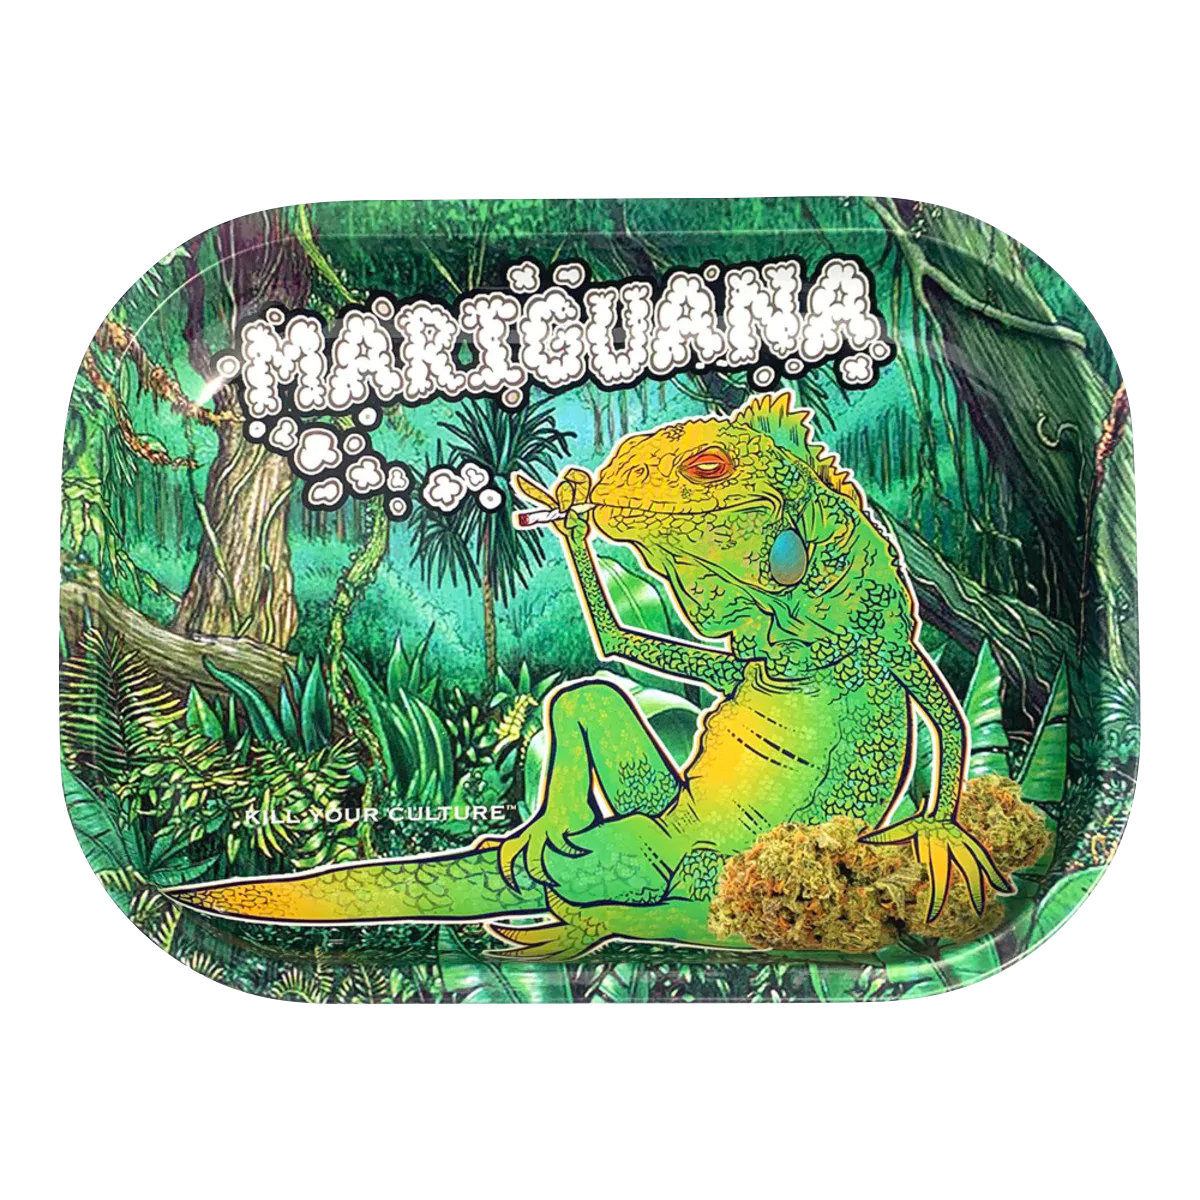 Kill Your Culture 'Mariguana' Metal Rolling Tray with Iguana Graphic, 7" x 5.5"